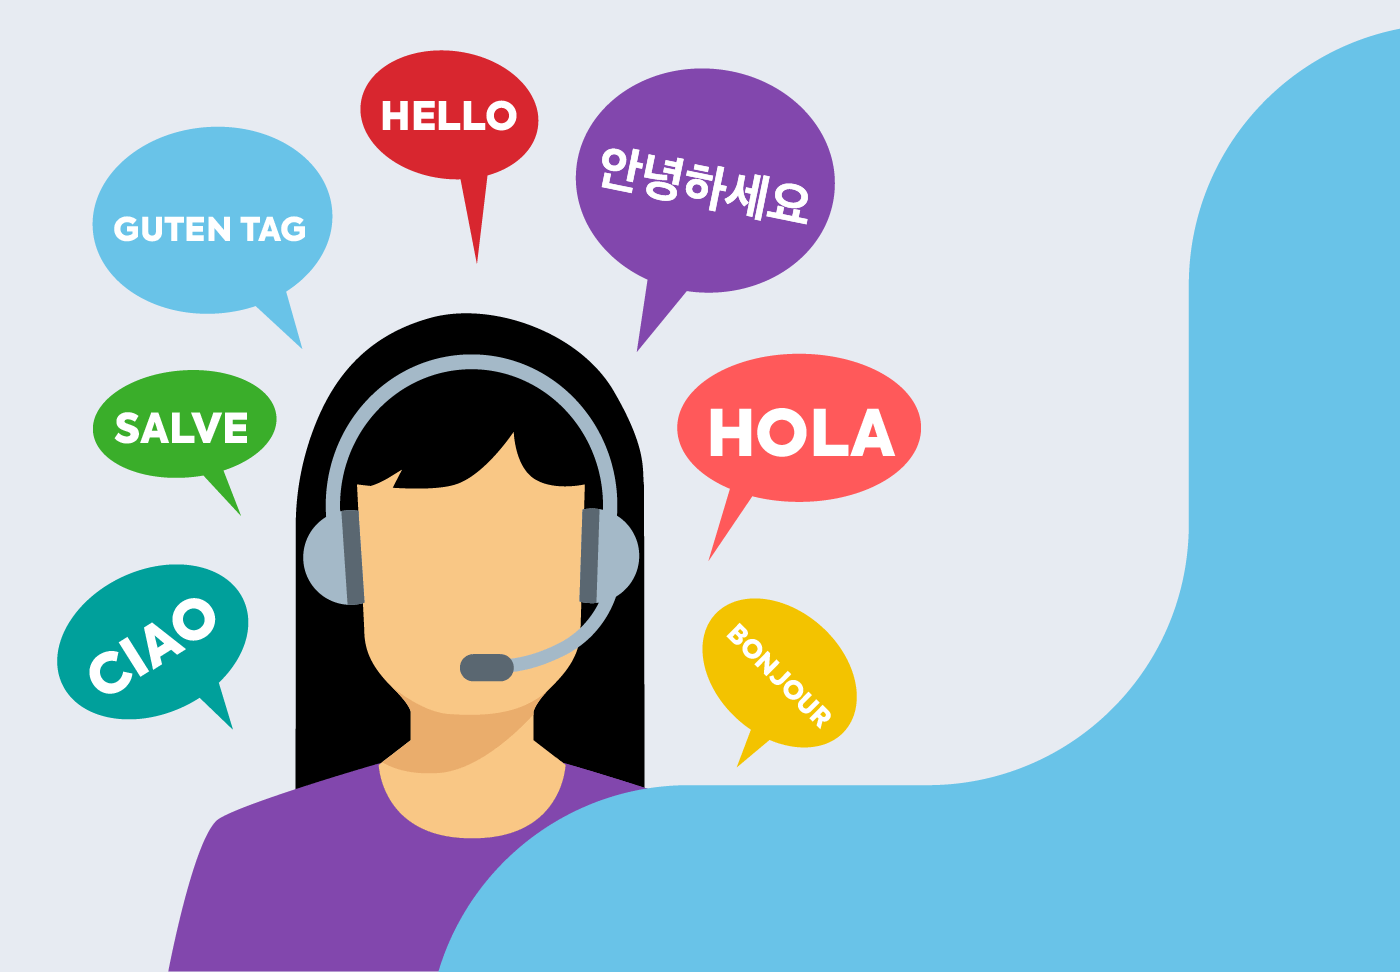 Illustration of person wearing headset, surrounded by speech bubbles with "hello" in several languages